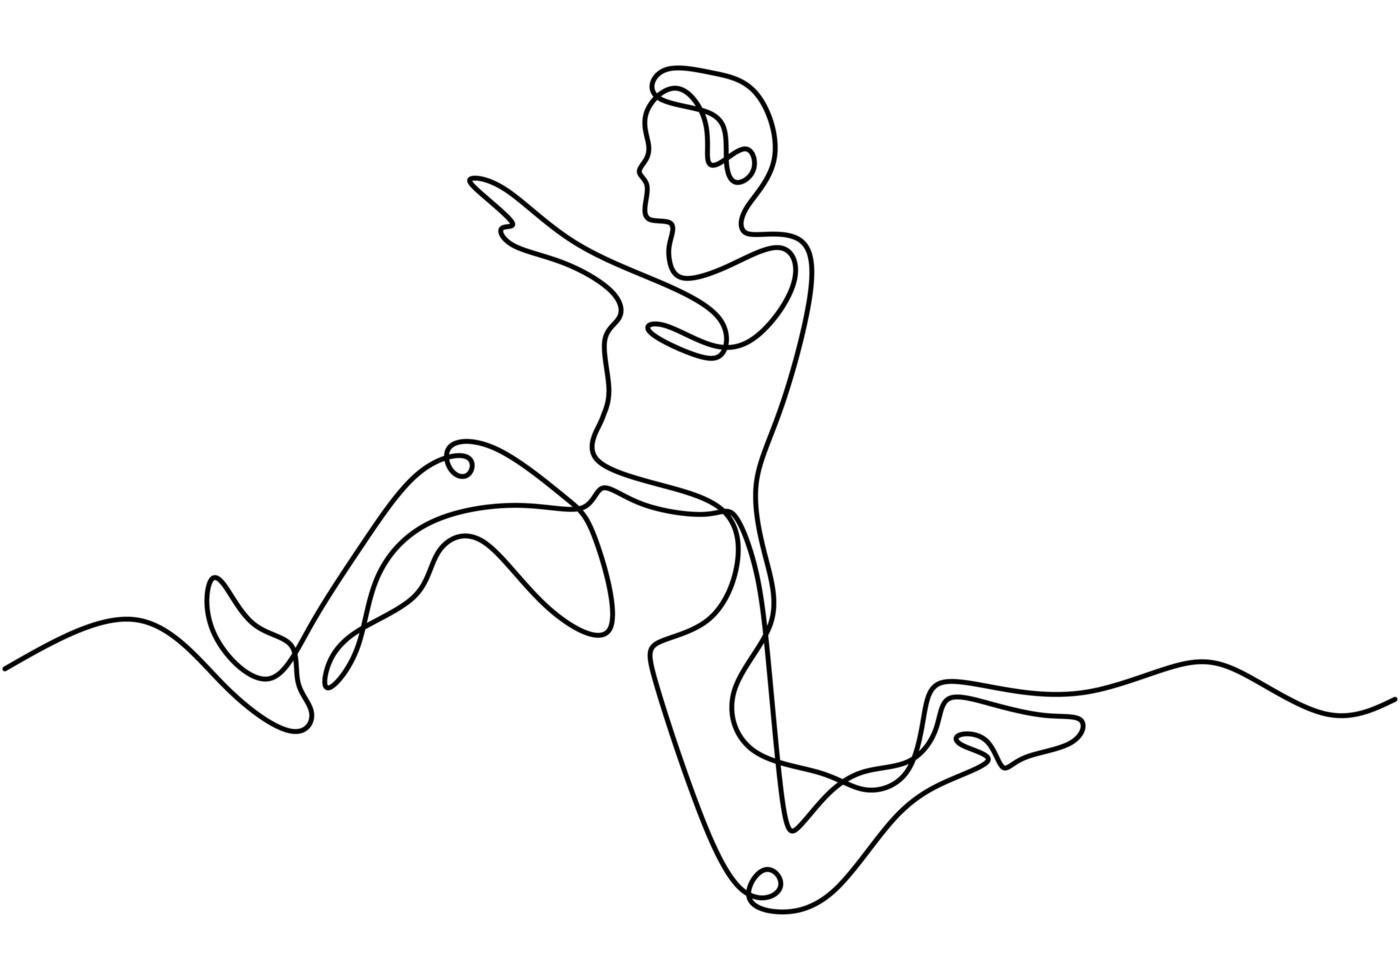 Continuous line drawing of athlete long jump. Young energetic athlete exercise to land on sand pool after jumping vector illustration, minimalism style.